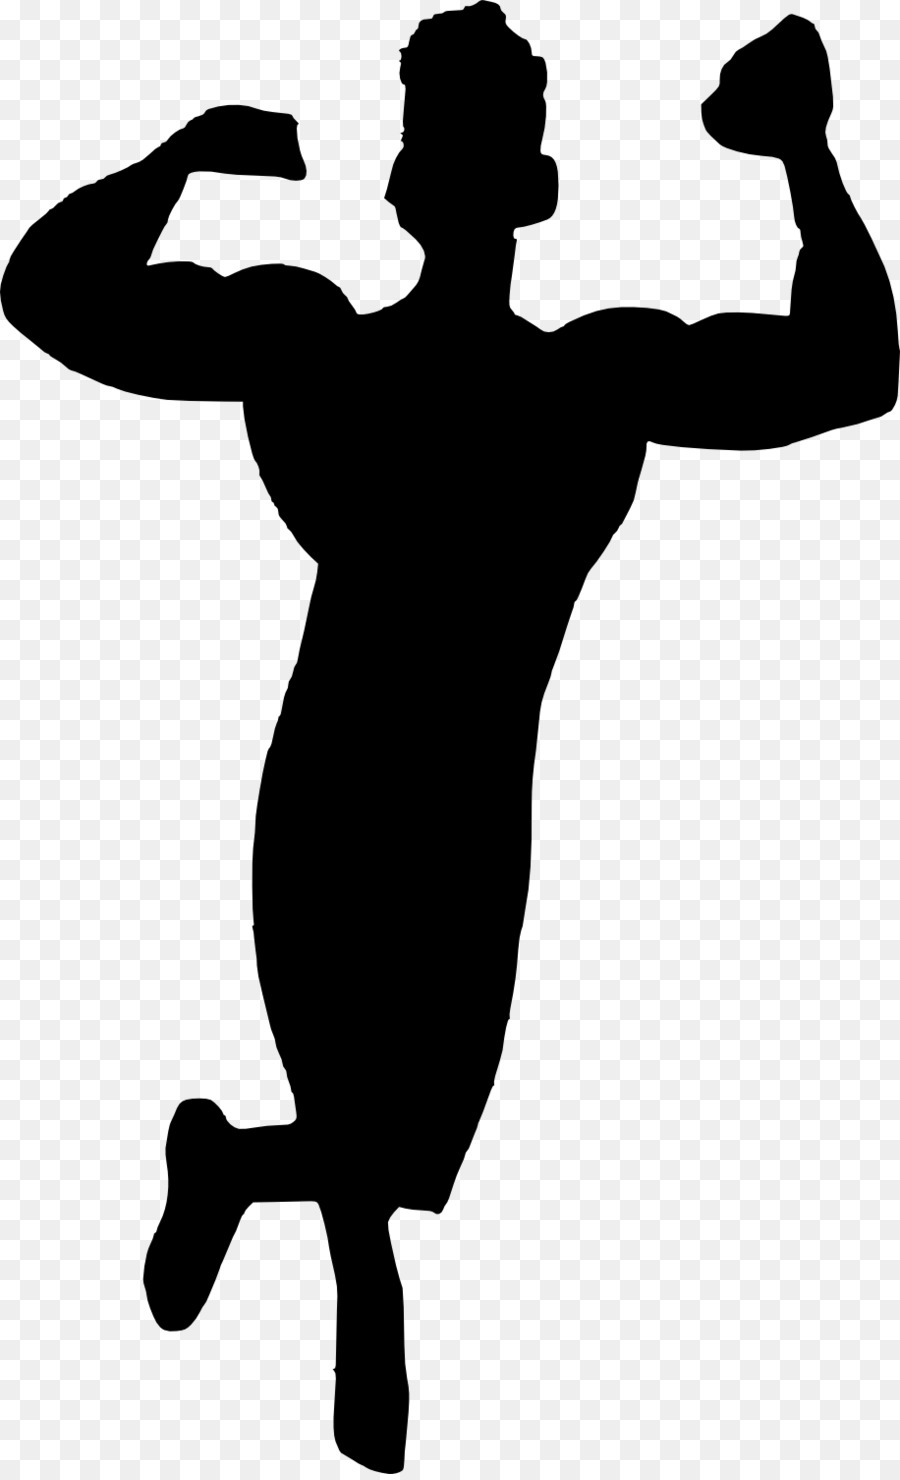 Silhouette Bodybuilding Muscle - bodybuilding png download - 916*1500 - Free Transparent Silhouette png Download.